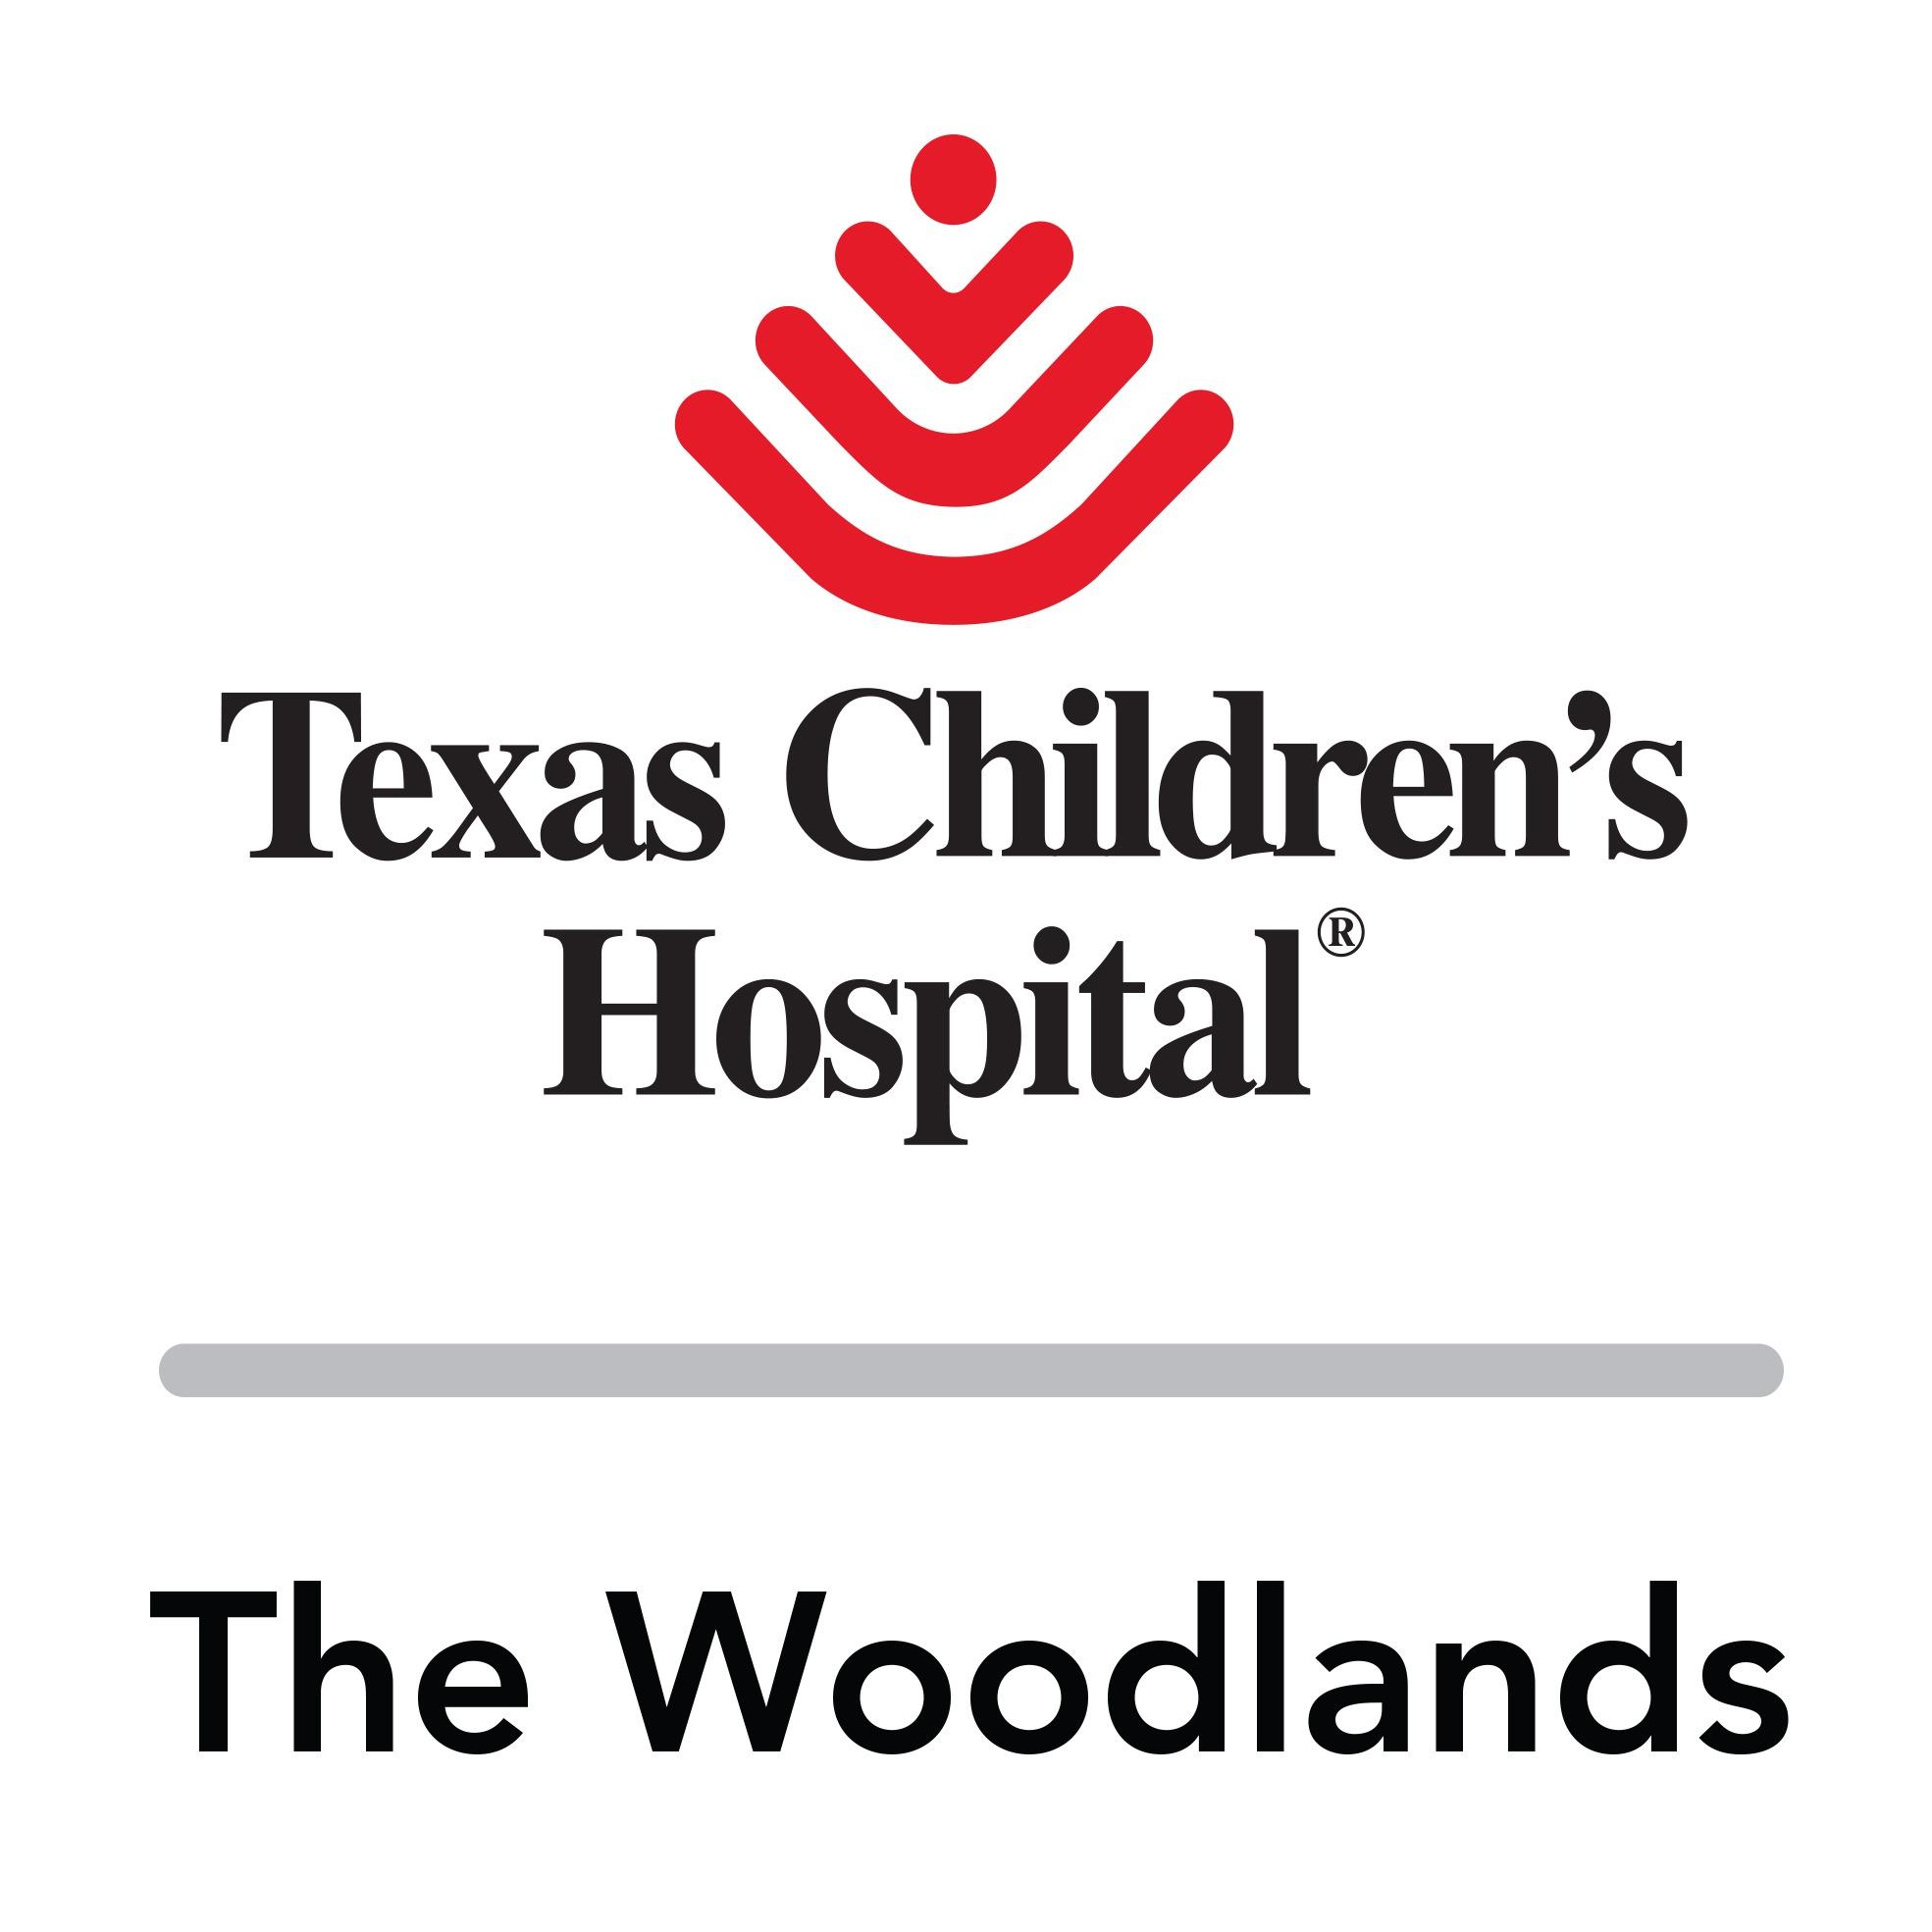 Texas Children's Hospital The Woodlands - Outpatient Services - The Woodlands, TX 77384 - (936)267-5000 | ShowMeLocal.com